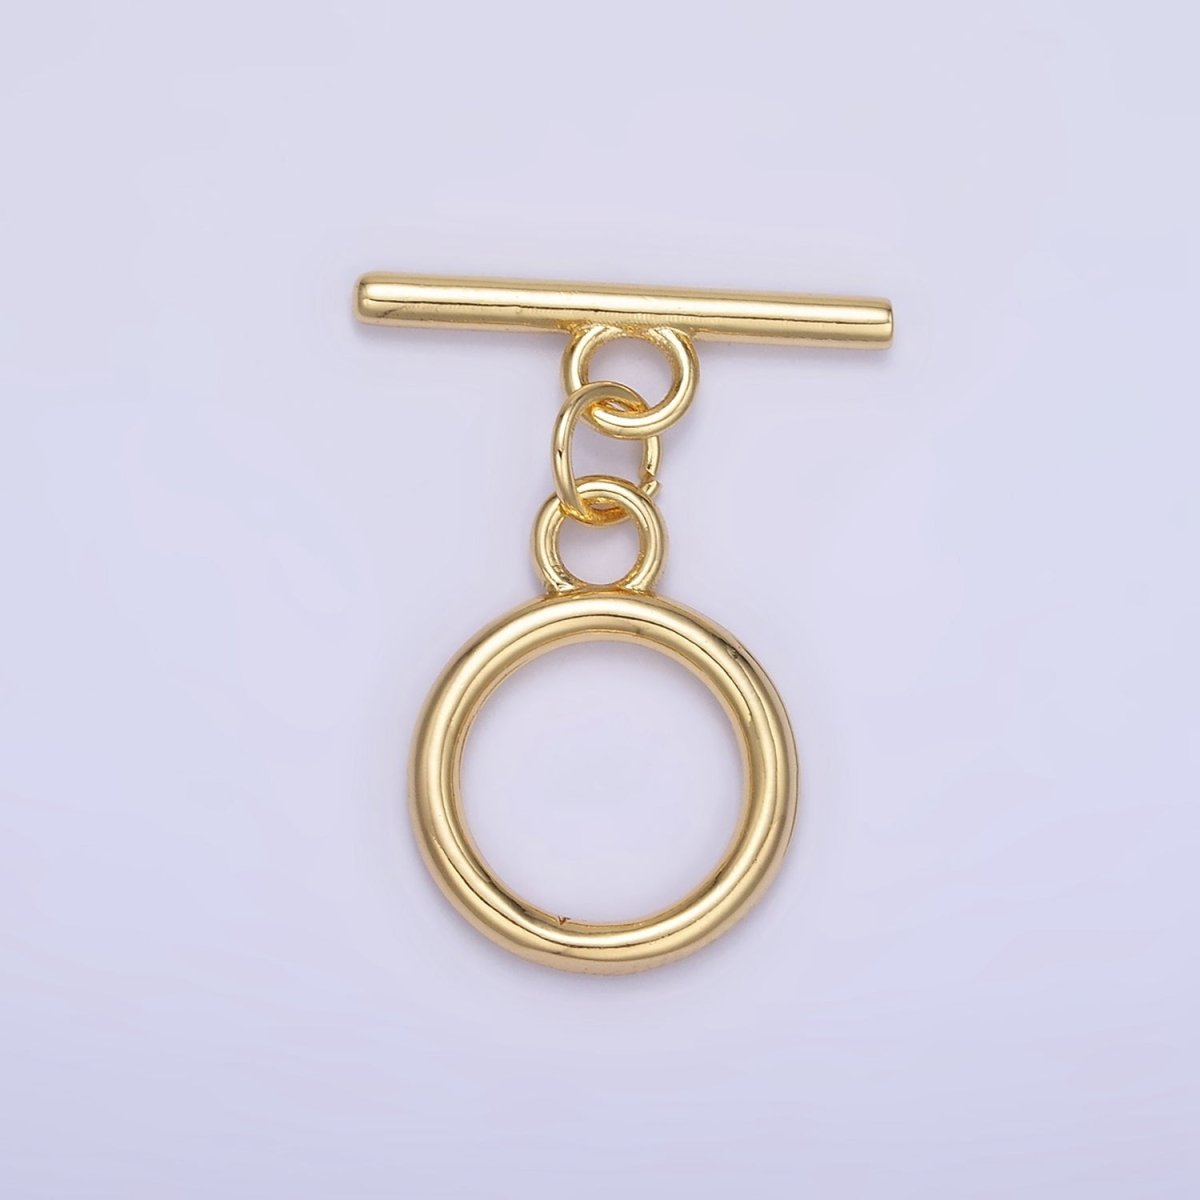 Gold Hook Clasps, Small Hook Charms, Hook Closure, Gold Clasp, Necklace  Hooks, Bracelet Hooks, Jewelry Clasp, 22k Matte Gold Plated - 15pc